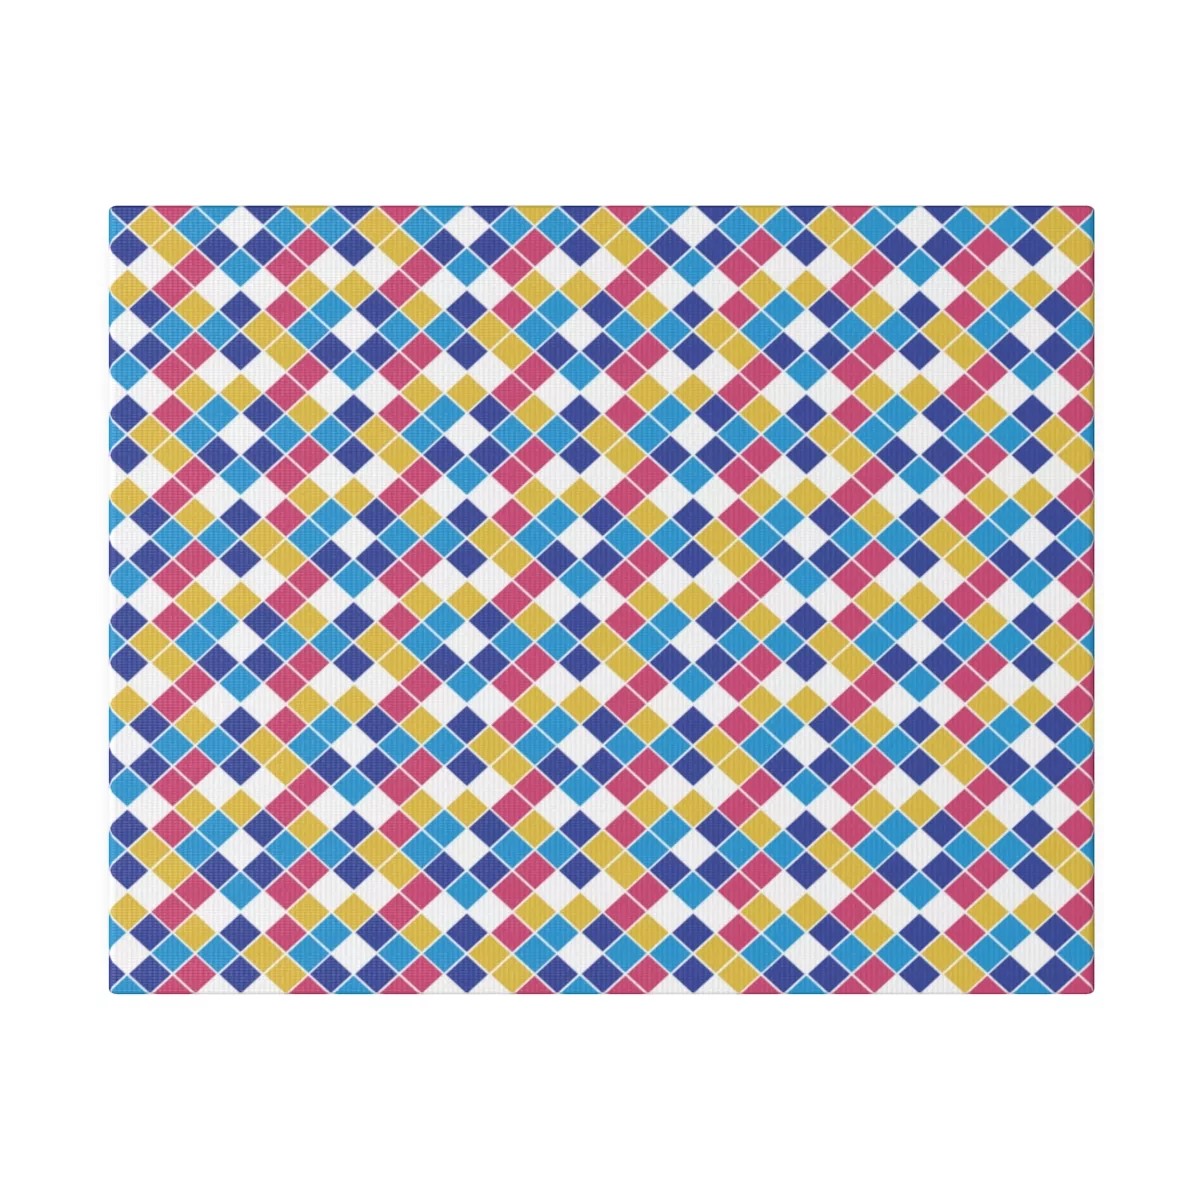 Taiwanese Bathroom Pattern | Matte Canvas, Stretched, 0.75"